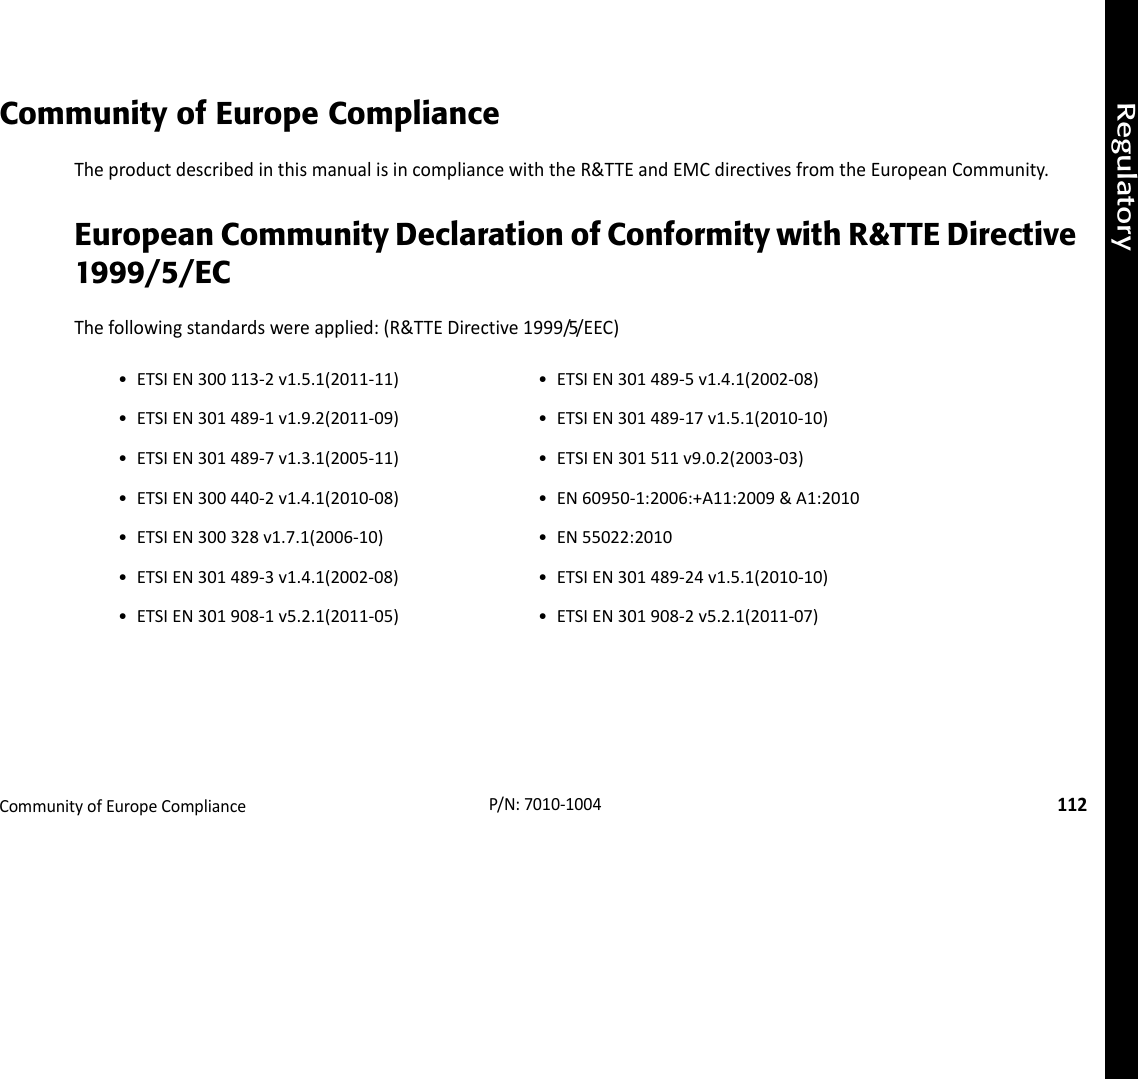 RegulatoryCommunityofEuropeCompliance112P/N:7010‐1004Community of Europe ComplianceTheproductdescribedinthismanualisincompliancewiththeR&amp;TTEandEMCdirectivesfromtheEuropeanCommunity.European Community Declaration of Conformity with R&amp;TTE Directive 1999/5/ECThefollowingstandardswereapplied:(R&amp;TTEDirective1999/5/EEC)• ETSIEN300113‐2v1.5.1(2011‐11) • ETSIEN301489‐5v1.4.1(2002‐08)• ETSIEN301489‐1v1.9.2(2011‐09) • ETSIEN301489‐17v1.5.1(2010‐10)• ETSIEN301489‐7v1.3.1(2005‐11) • ETSIEN301511v9.0.2(2003‐03)• ETSIEN300440‐2v1.4.1(2010‐08) • EN60950‐1:2006:+A11:2009&amp;A1:2010• ETSIEN300328v1.7.1(2006‐10) • EN55022:2010• ETSIEN301489‐3v1.4.1(2002‐08) • ETSIEN301489‐24v1.5.1(2010‐10)• ETSIEN301908‐1v5.2.1(2011‐05) • ETSIEN301908‐2v5.2.1(2011‐07)